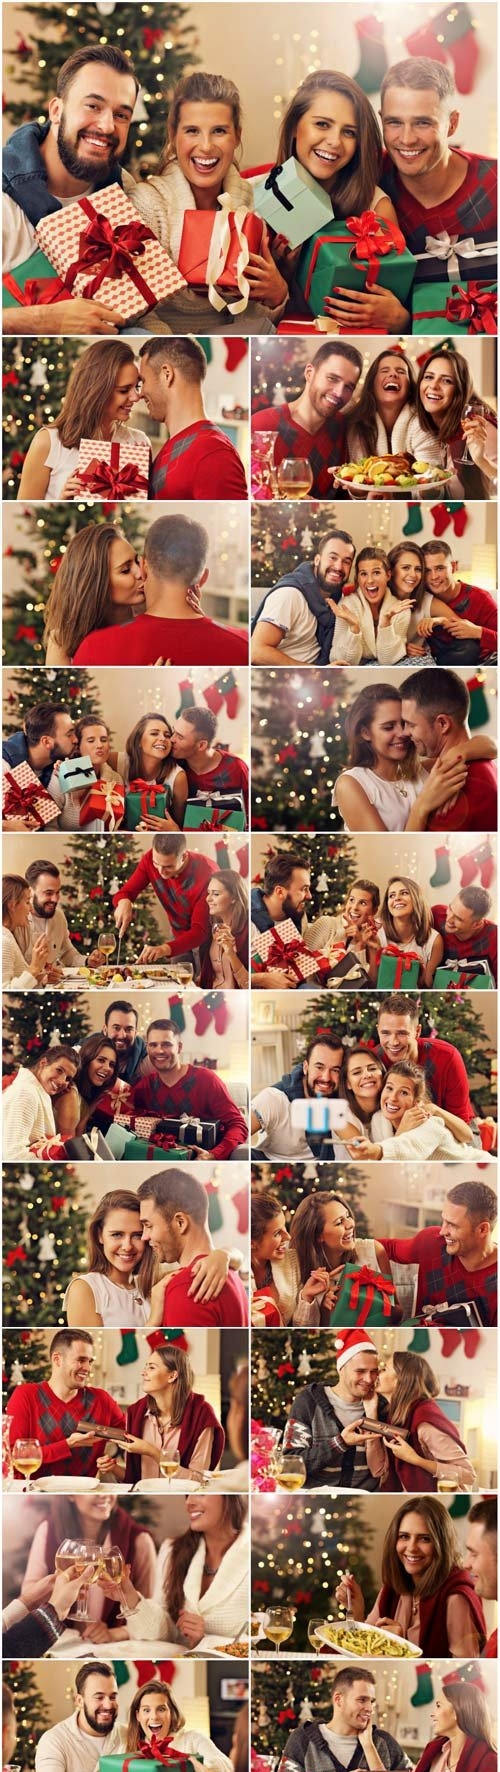 New Year and Christmas stock photos - 56